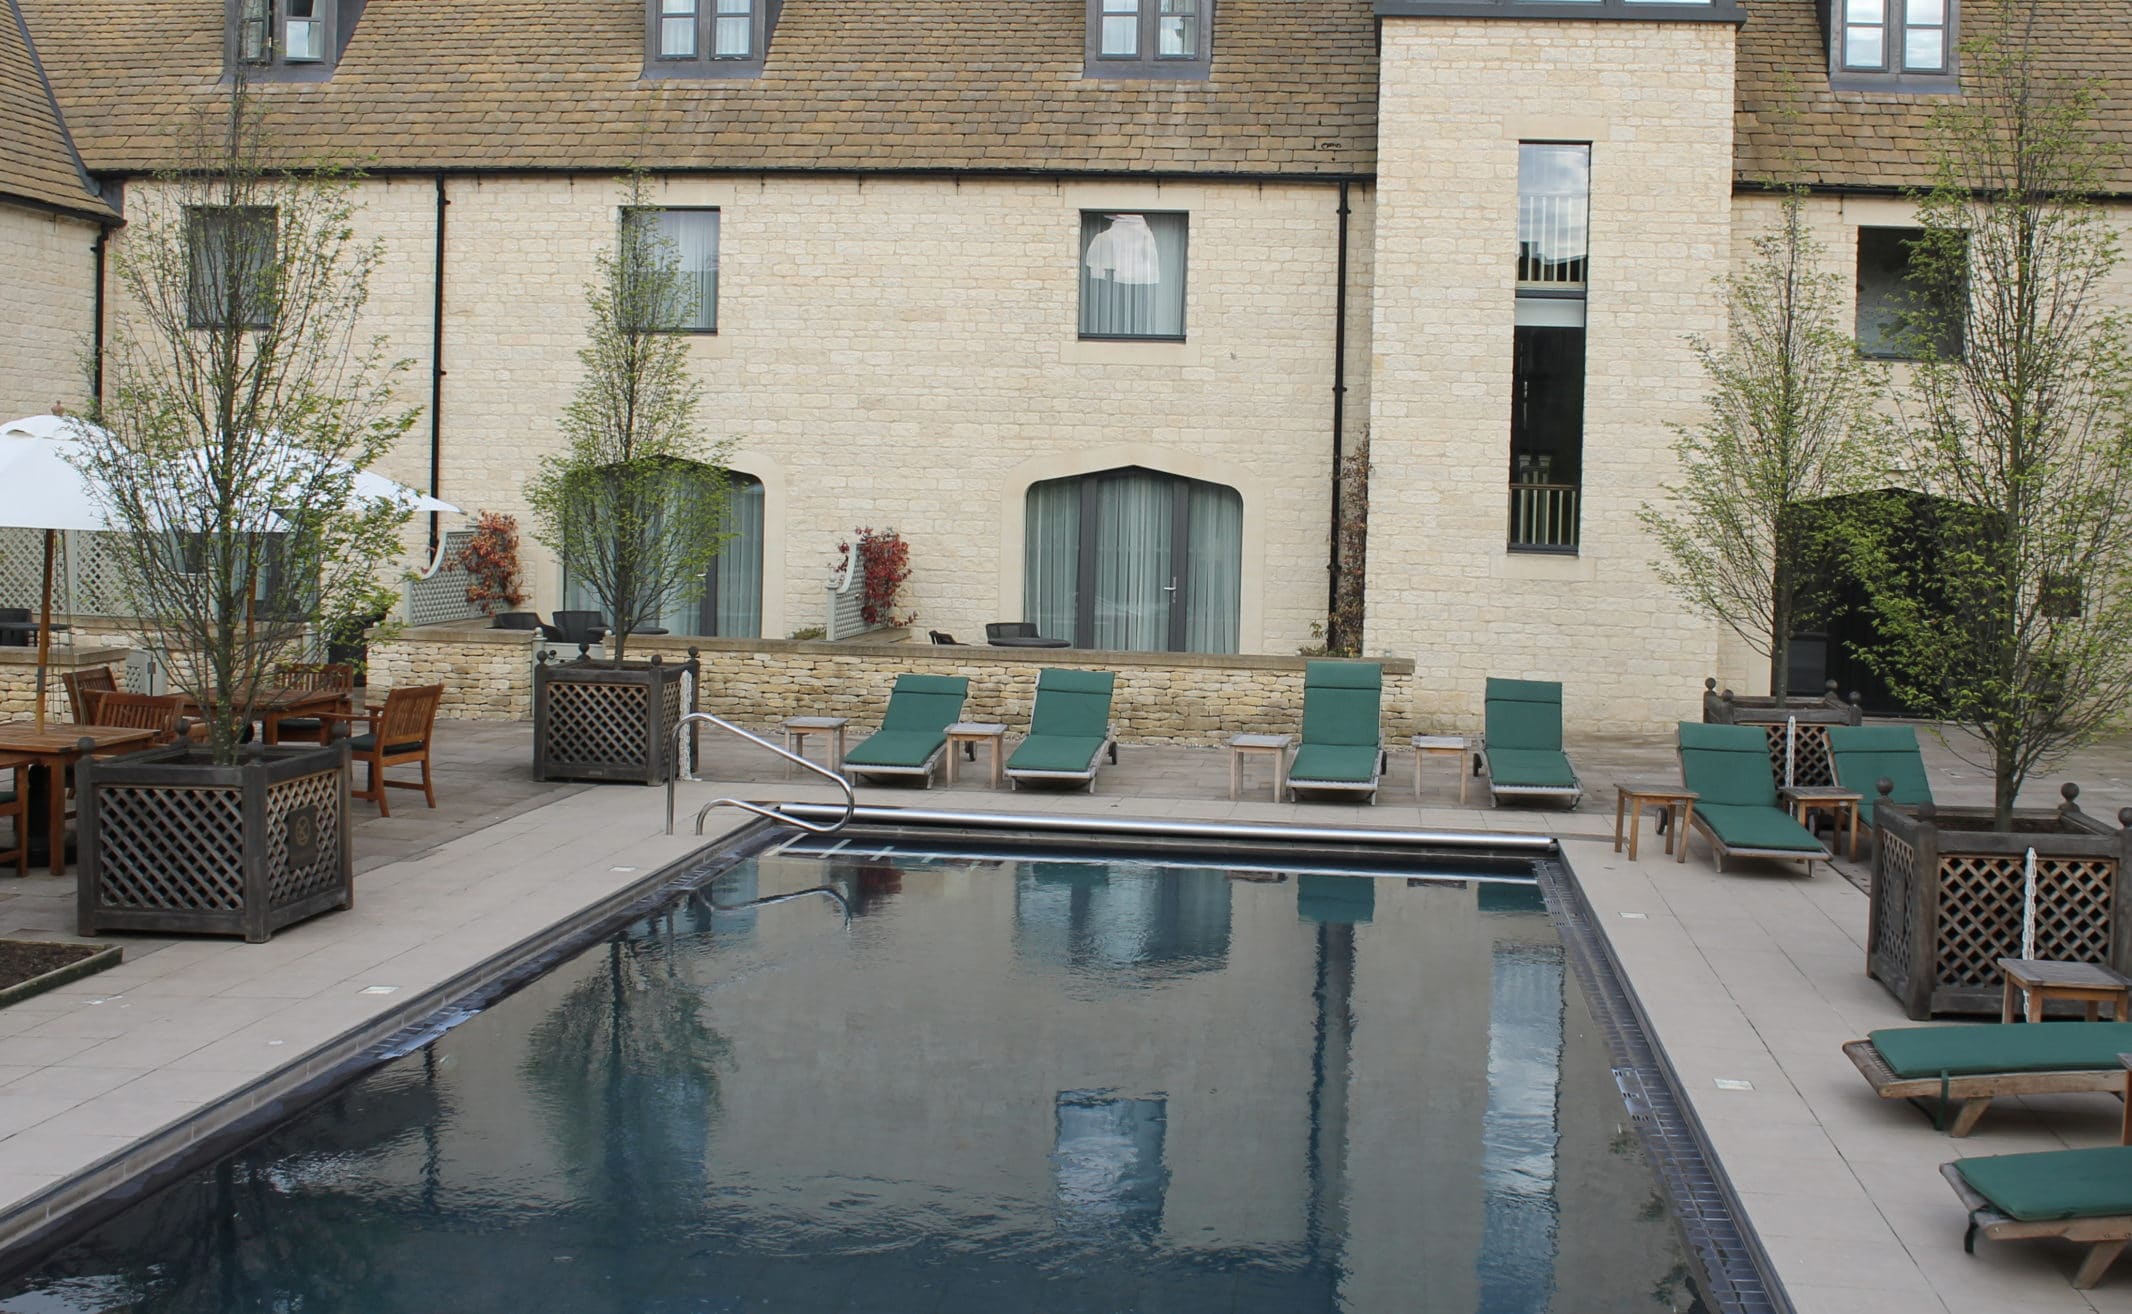 The heated outdoor pool at Ellenborough Park is so inviting.